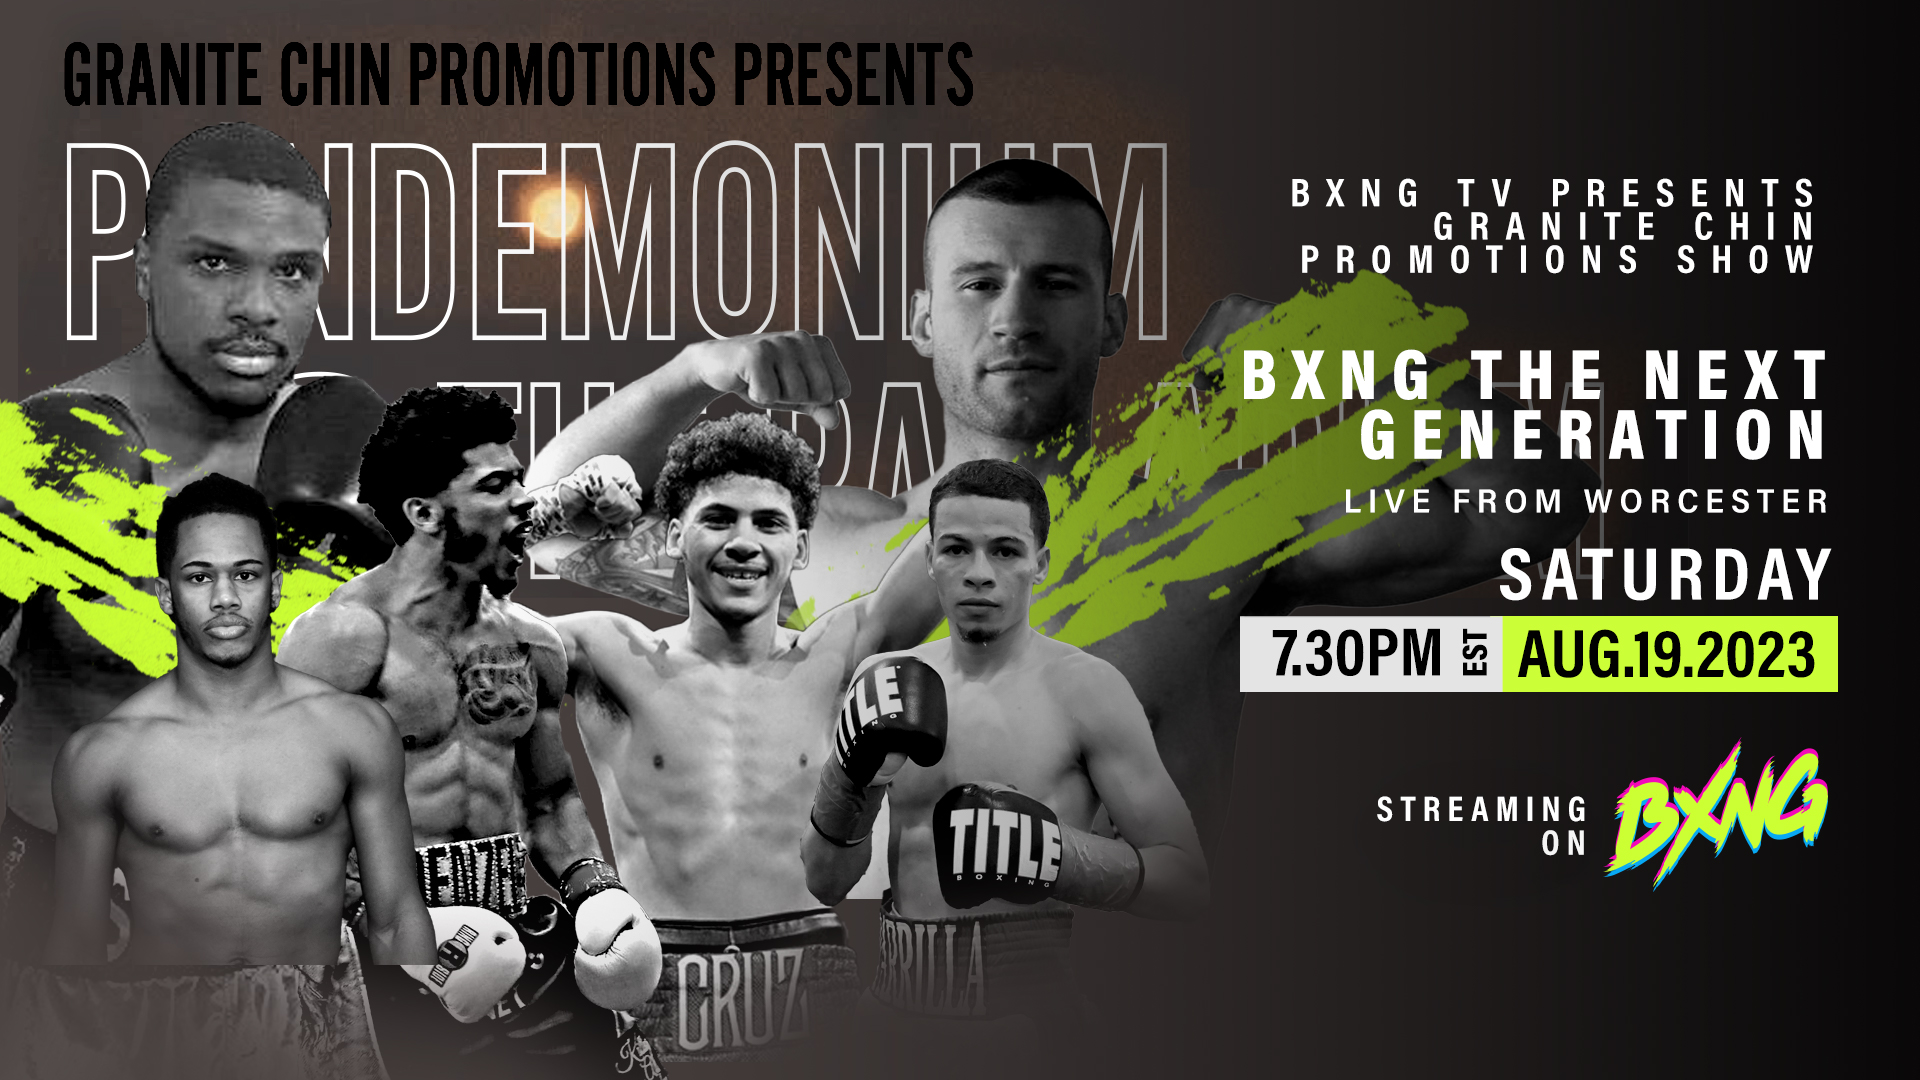 BXNG TV Presents Granite Chin Promotions Show Live Stream 08/19/23